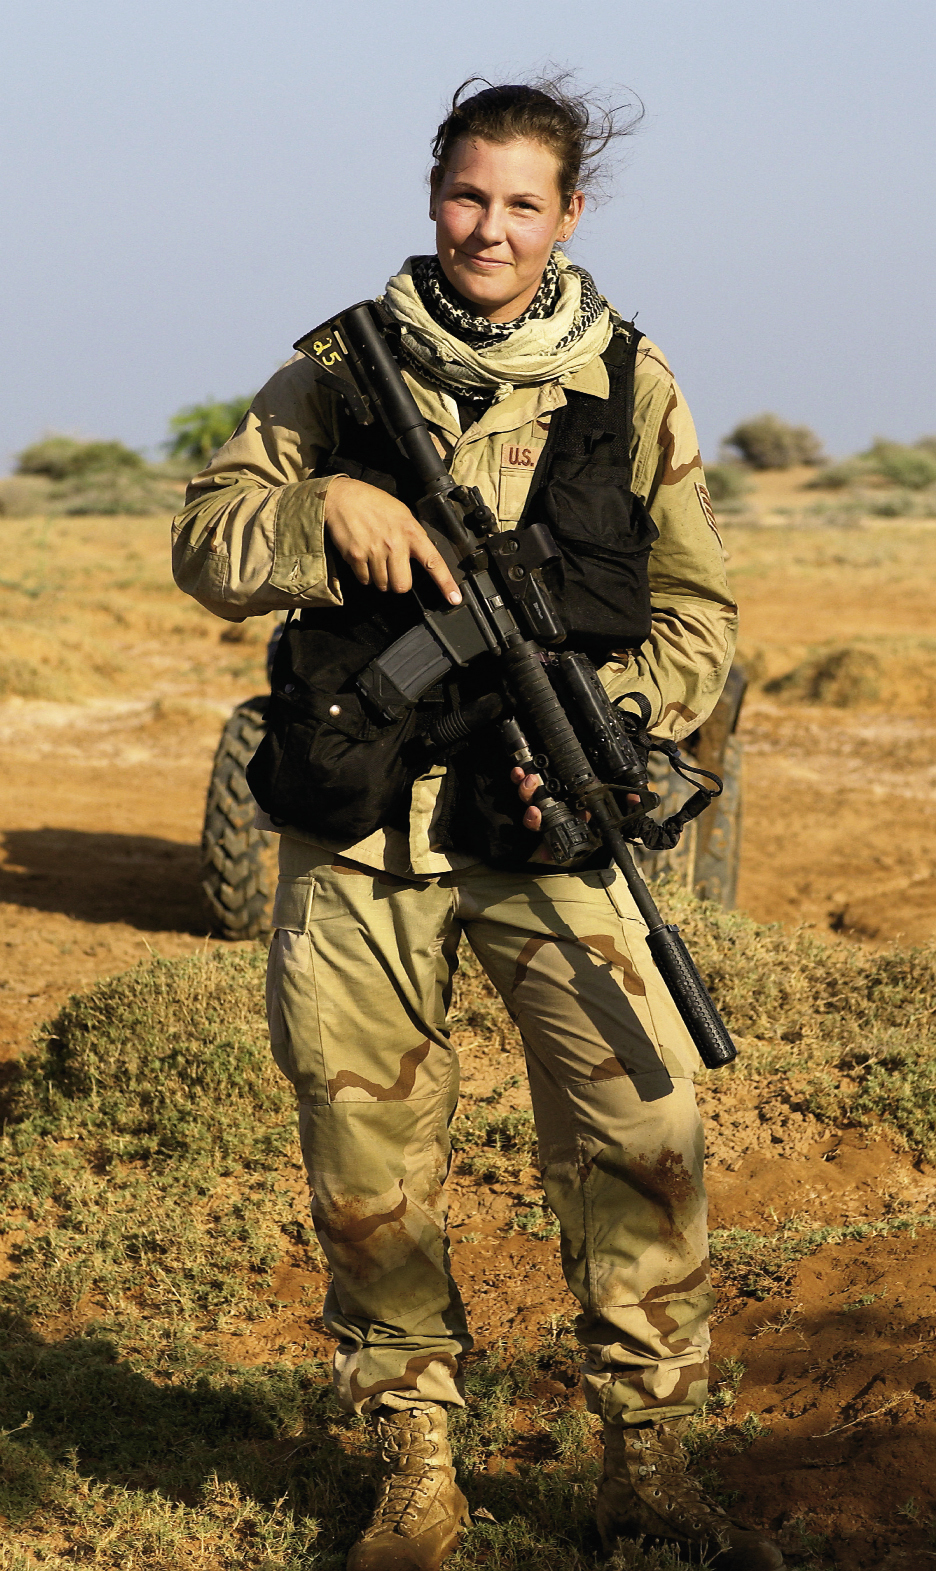 November 4, 2005: Staff Sgt. Stacy L. Pearsall on an operation with Special Forces personnel near the border of Somalia